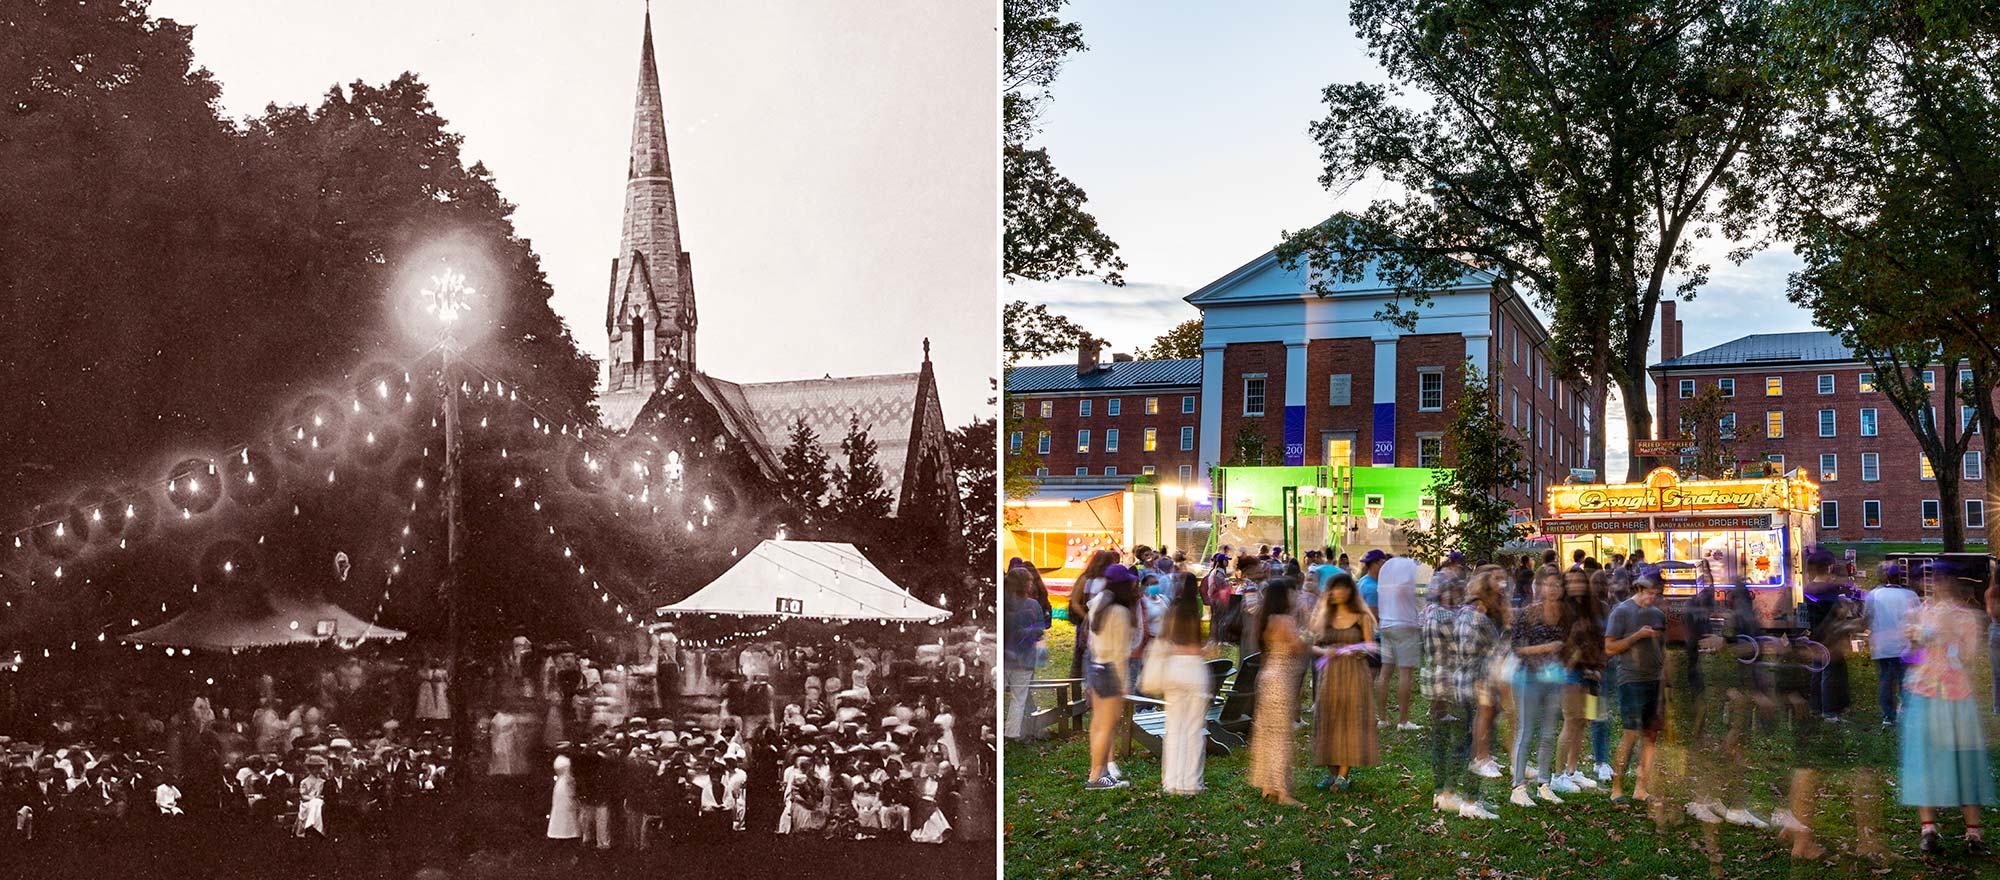 Two photos of the same place on the academic, a historic black and white image, and one taken during the bicentennial party